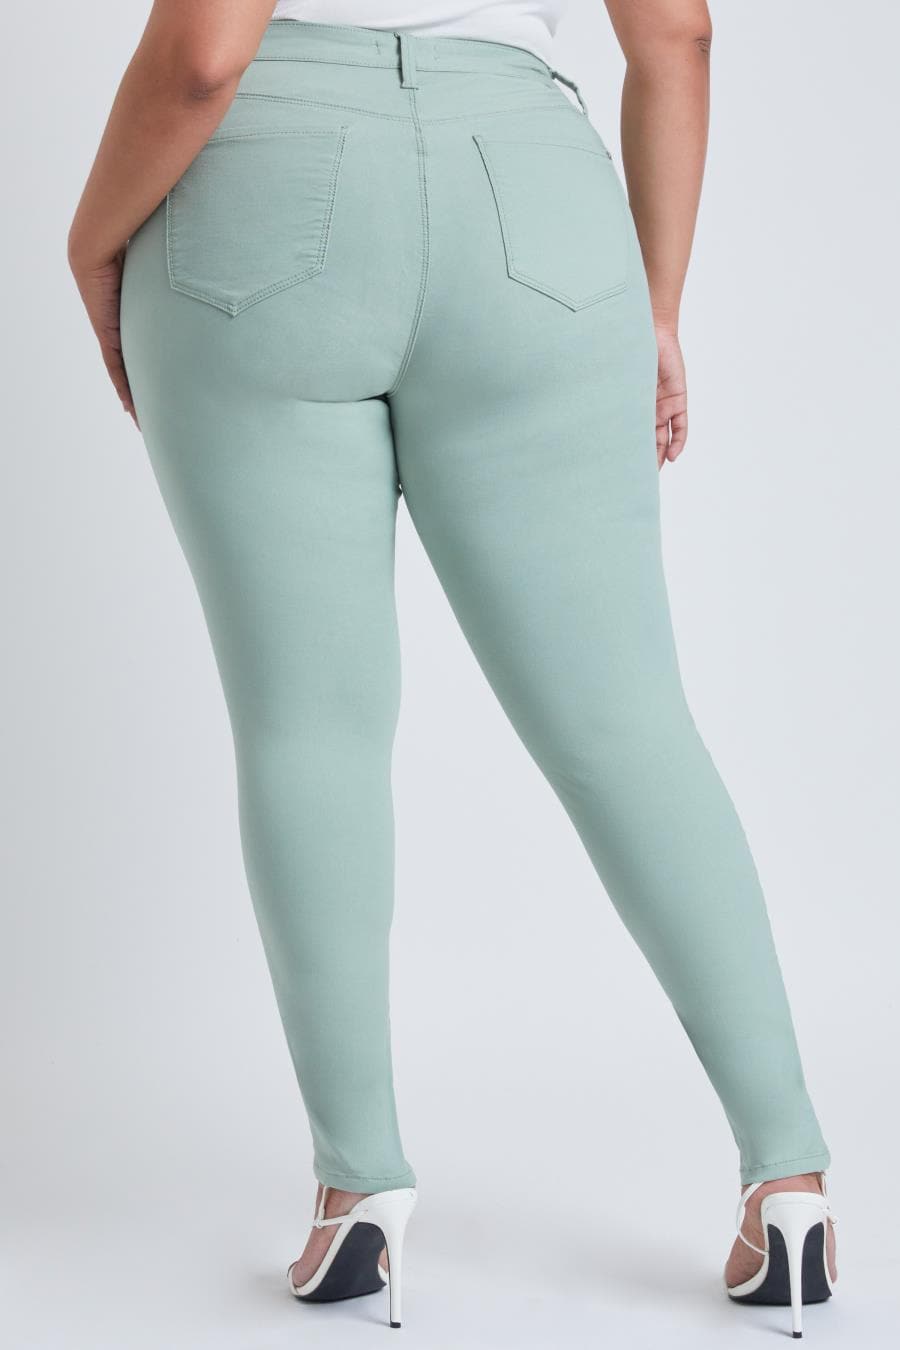 Junior Plus Size Hyperstretch Skinny Jean Ep527931